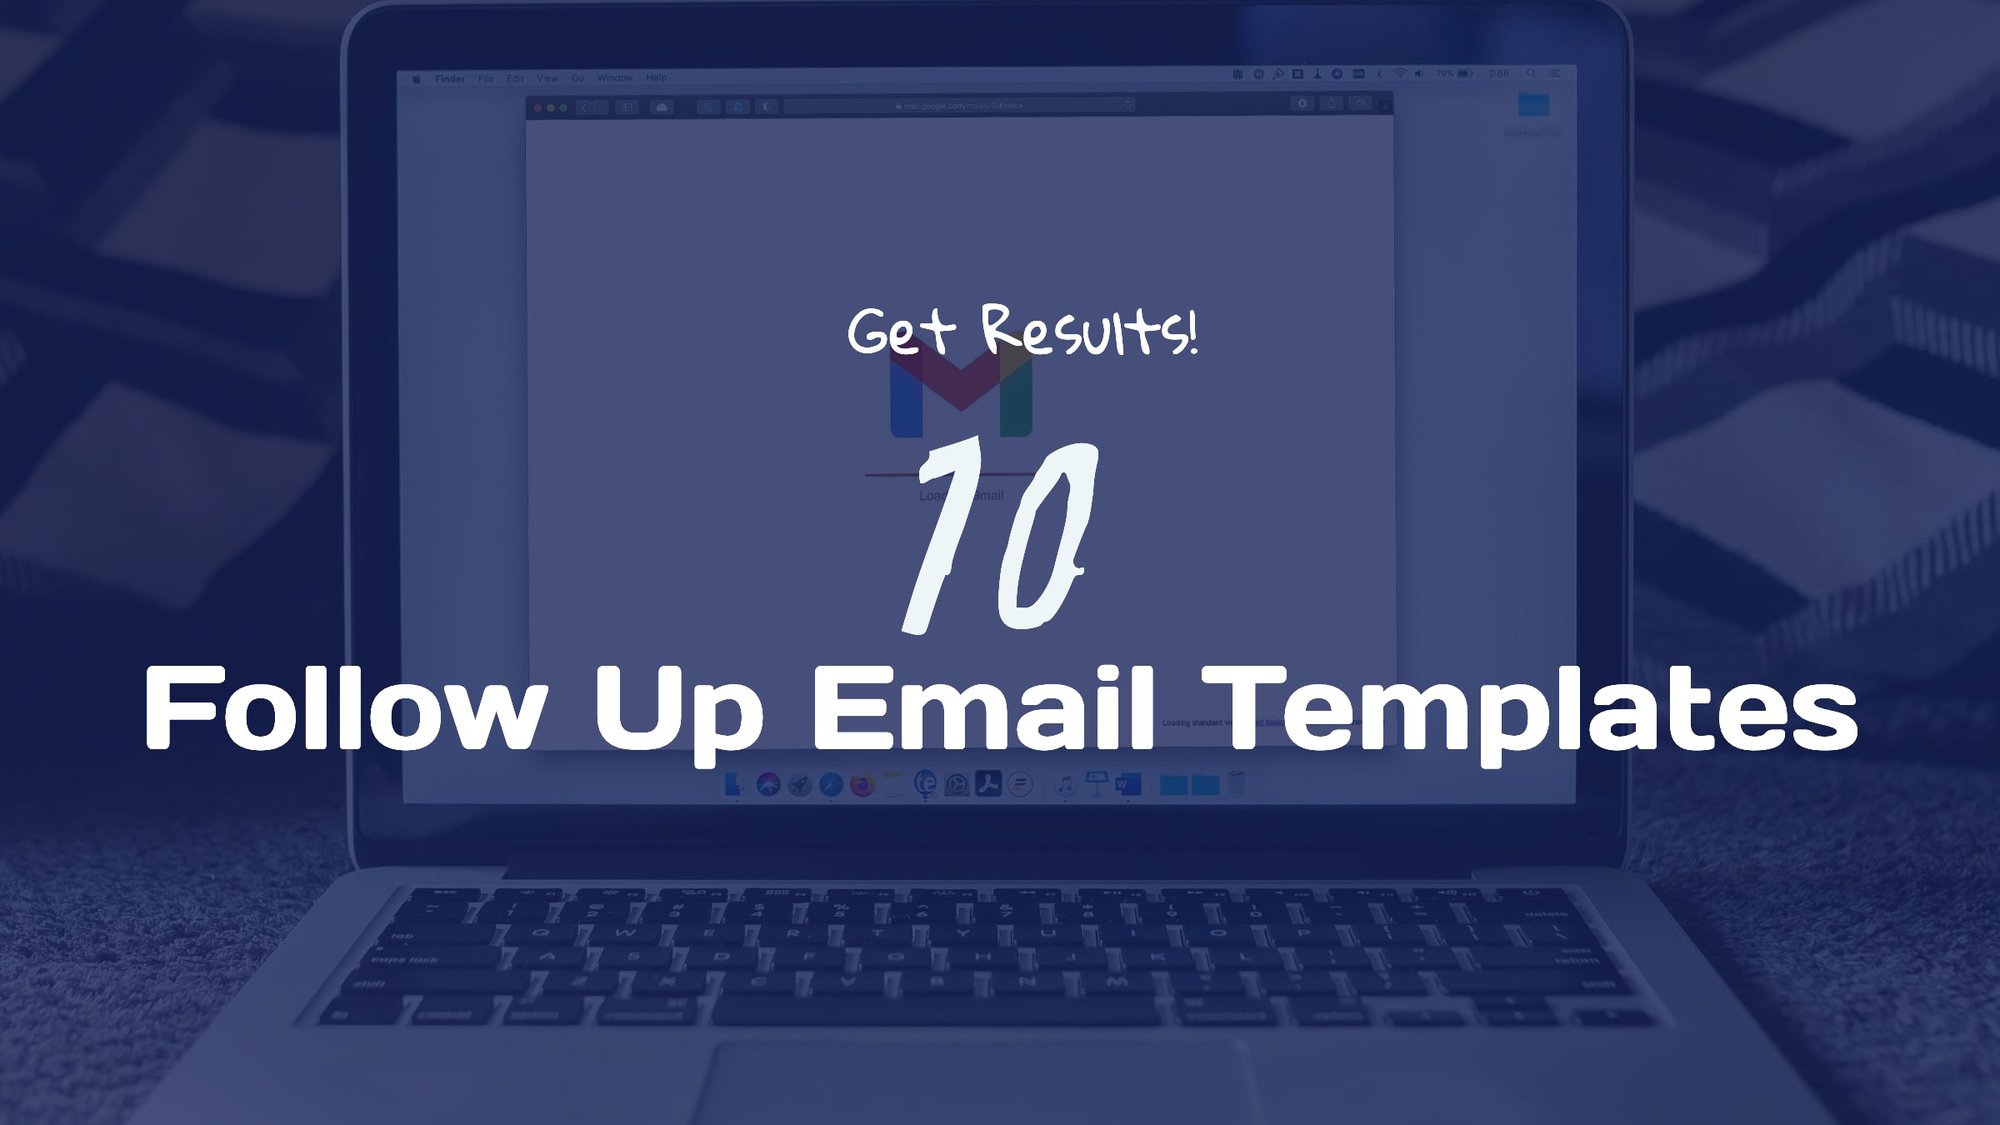 10 Follow Up Email Templates To Get Results in 2021